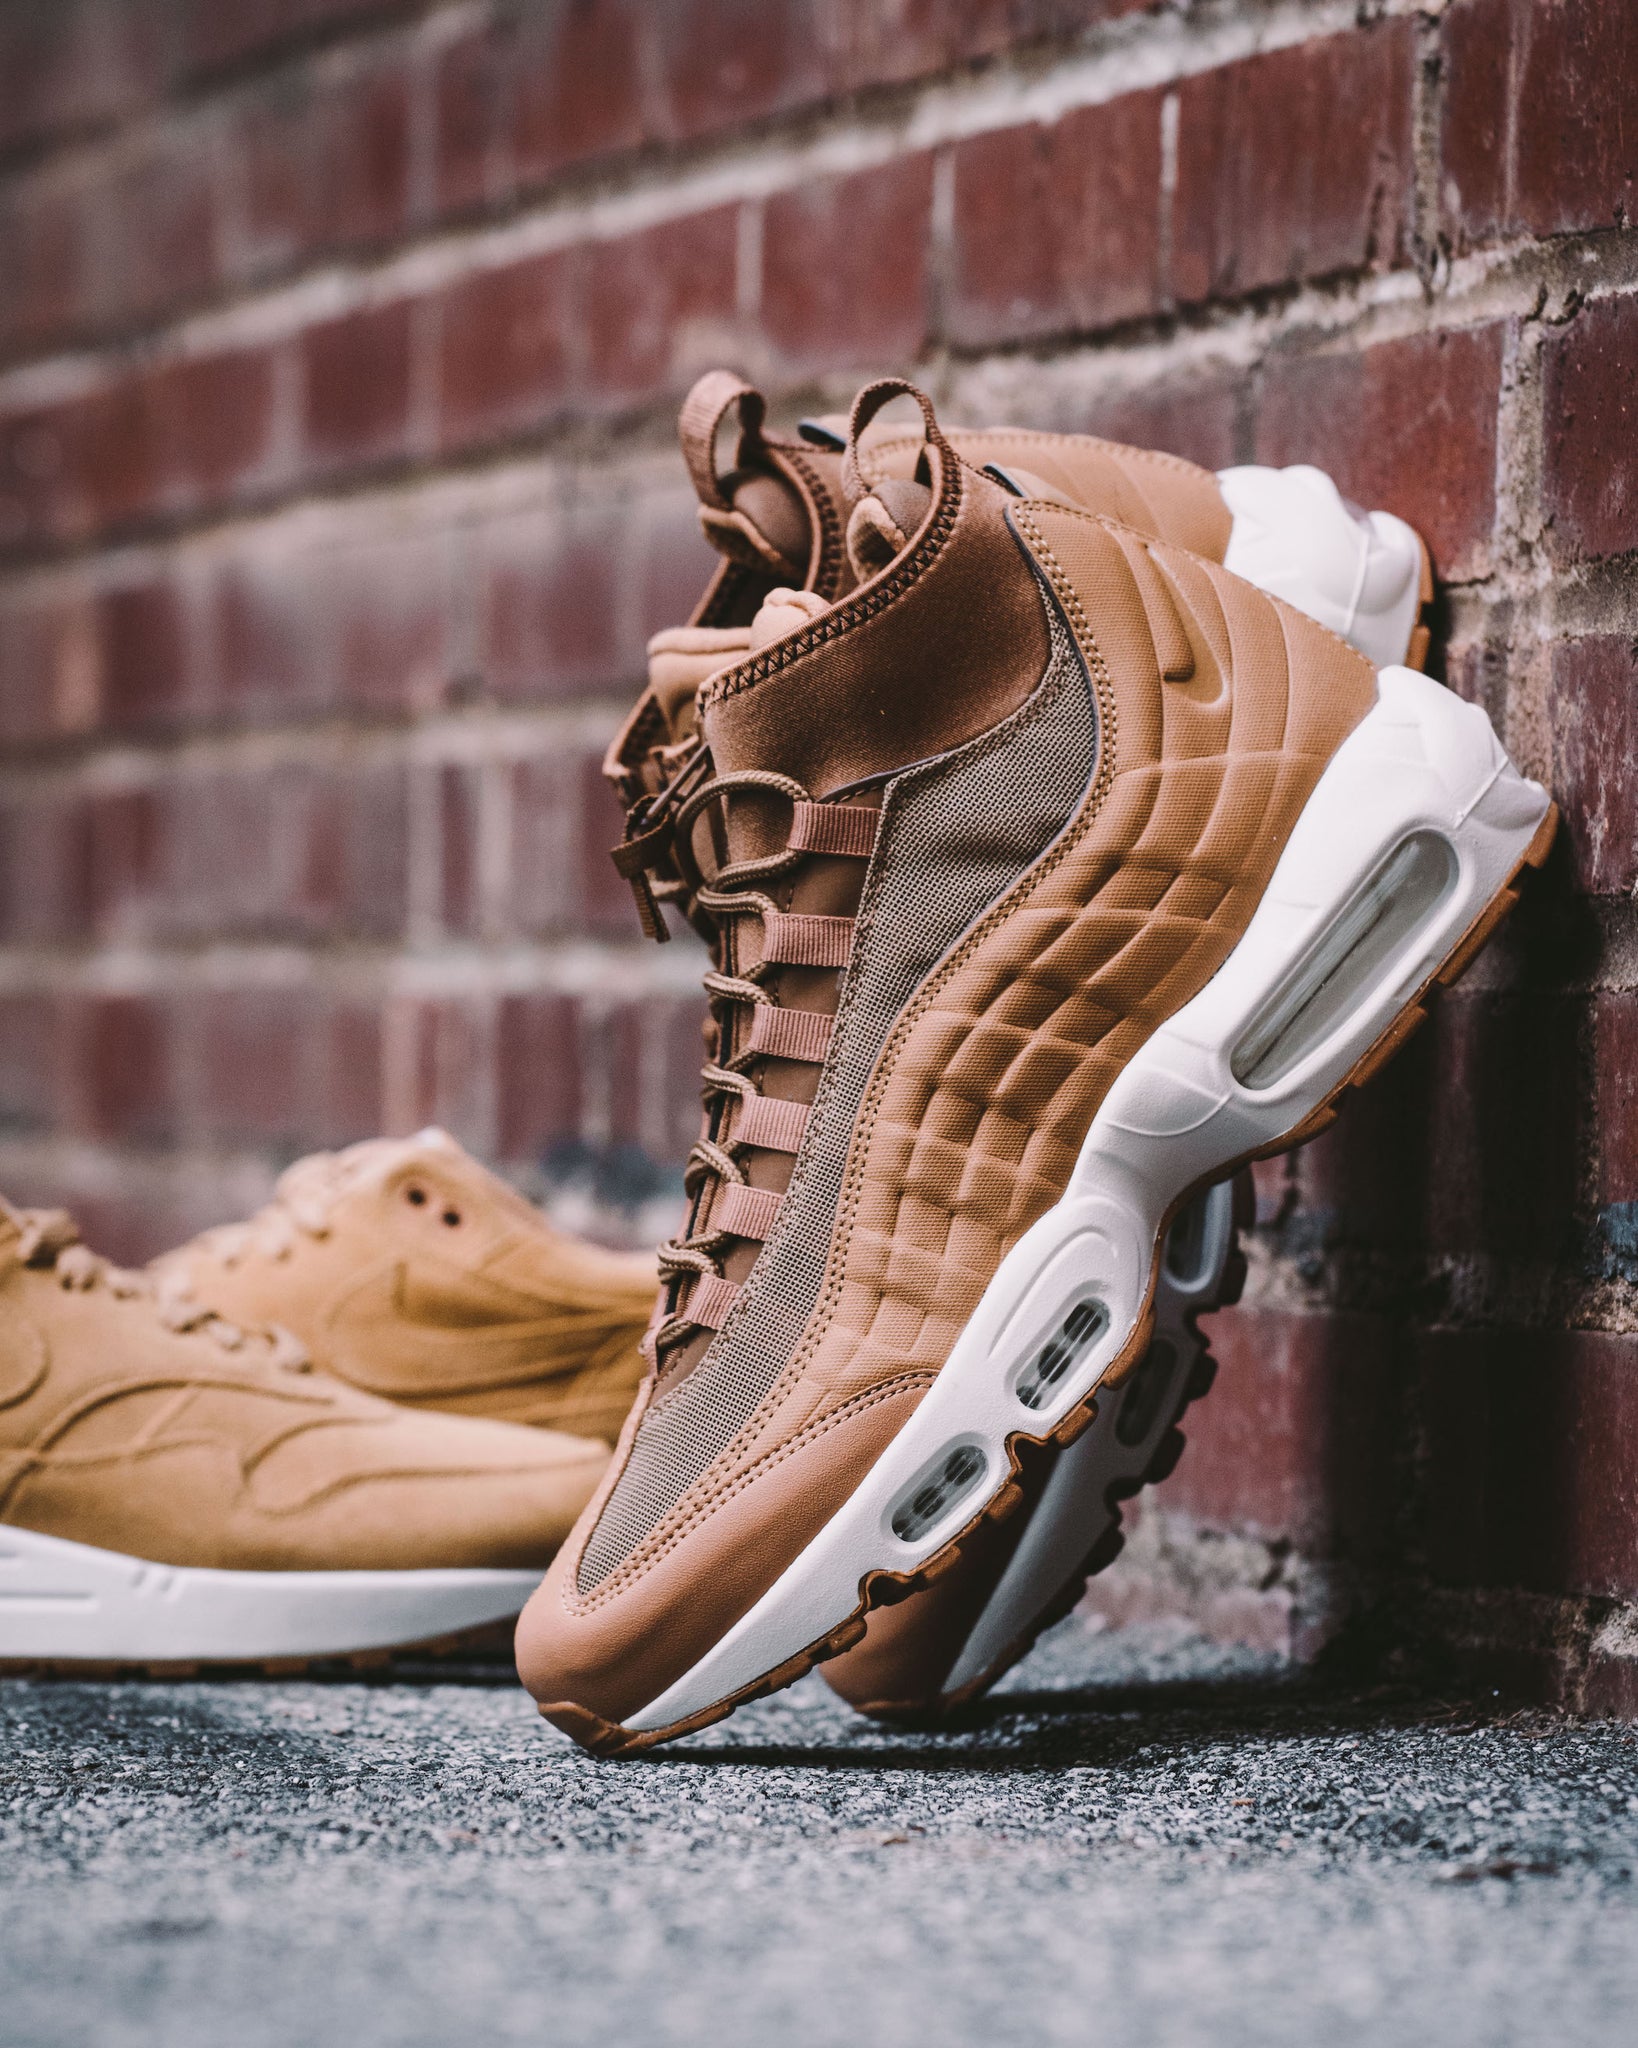 AIR MAX '95 SNEAKERBOOT AIR '90 "WHEAT PACK" – Epitome